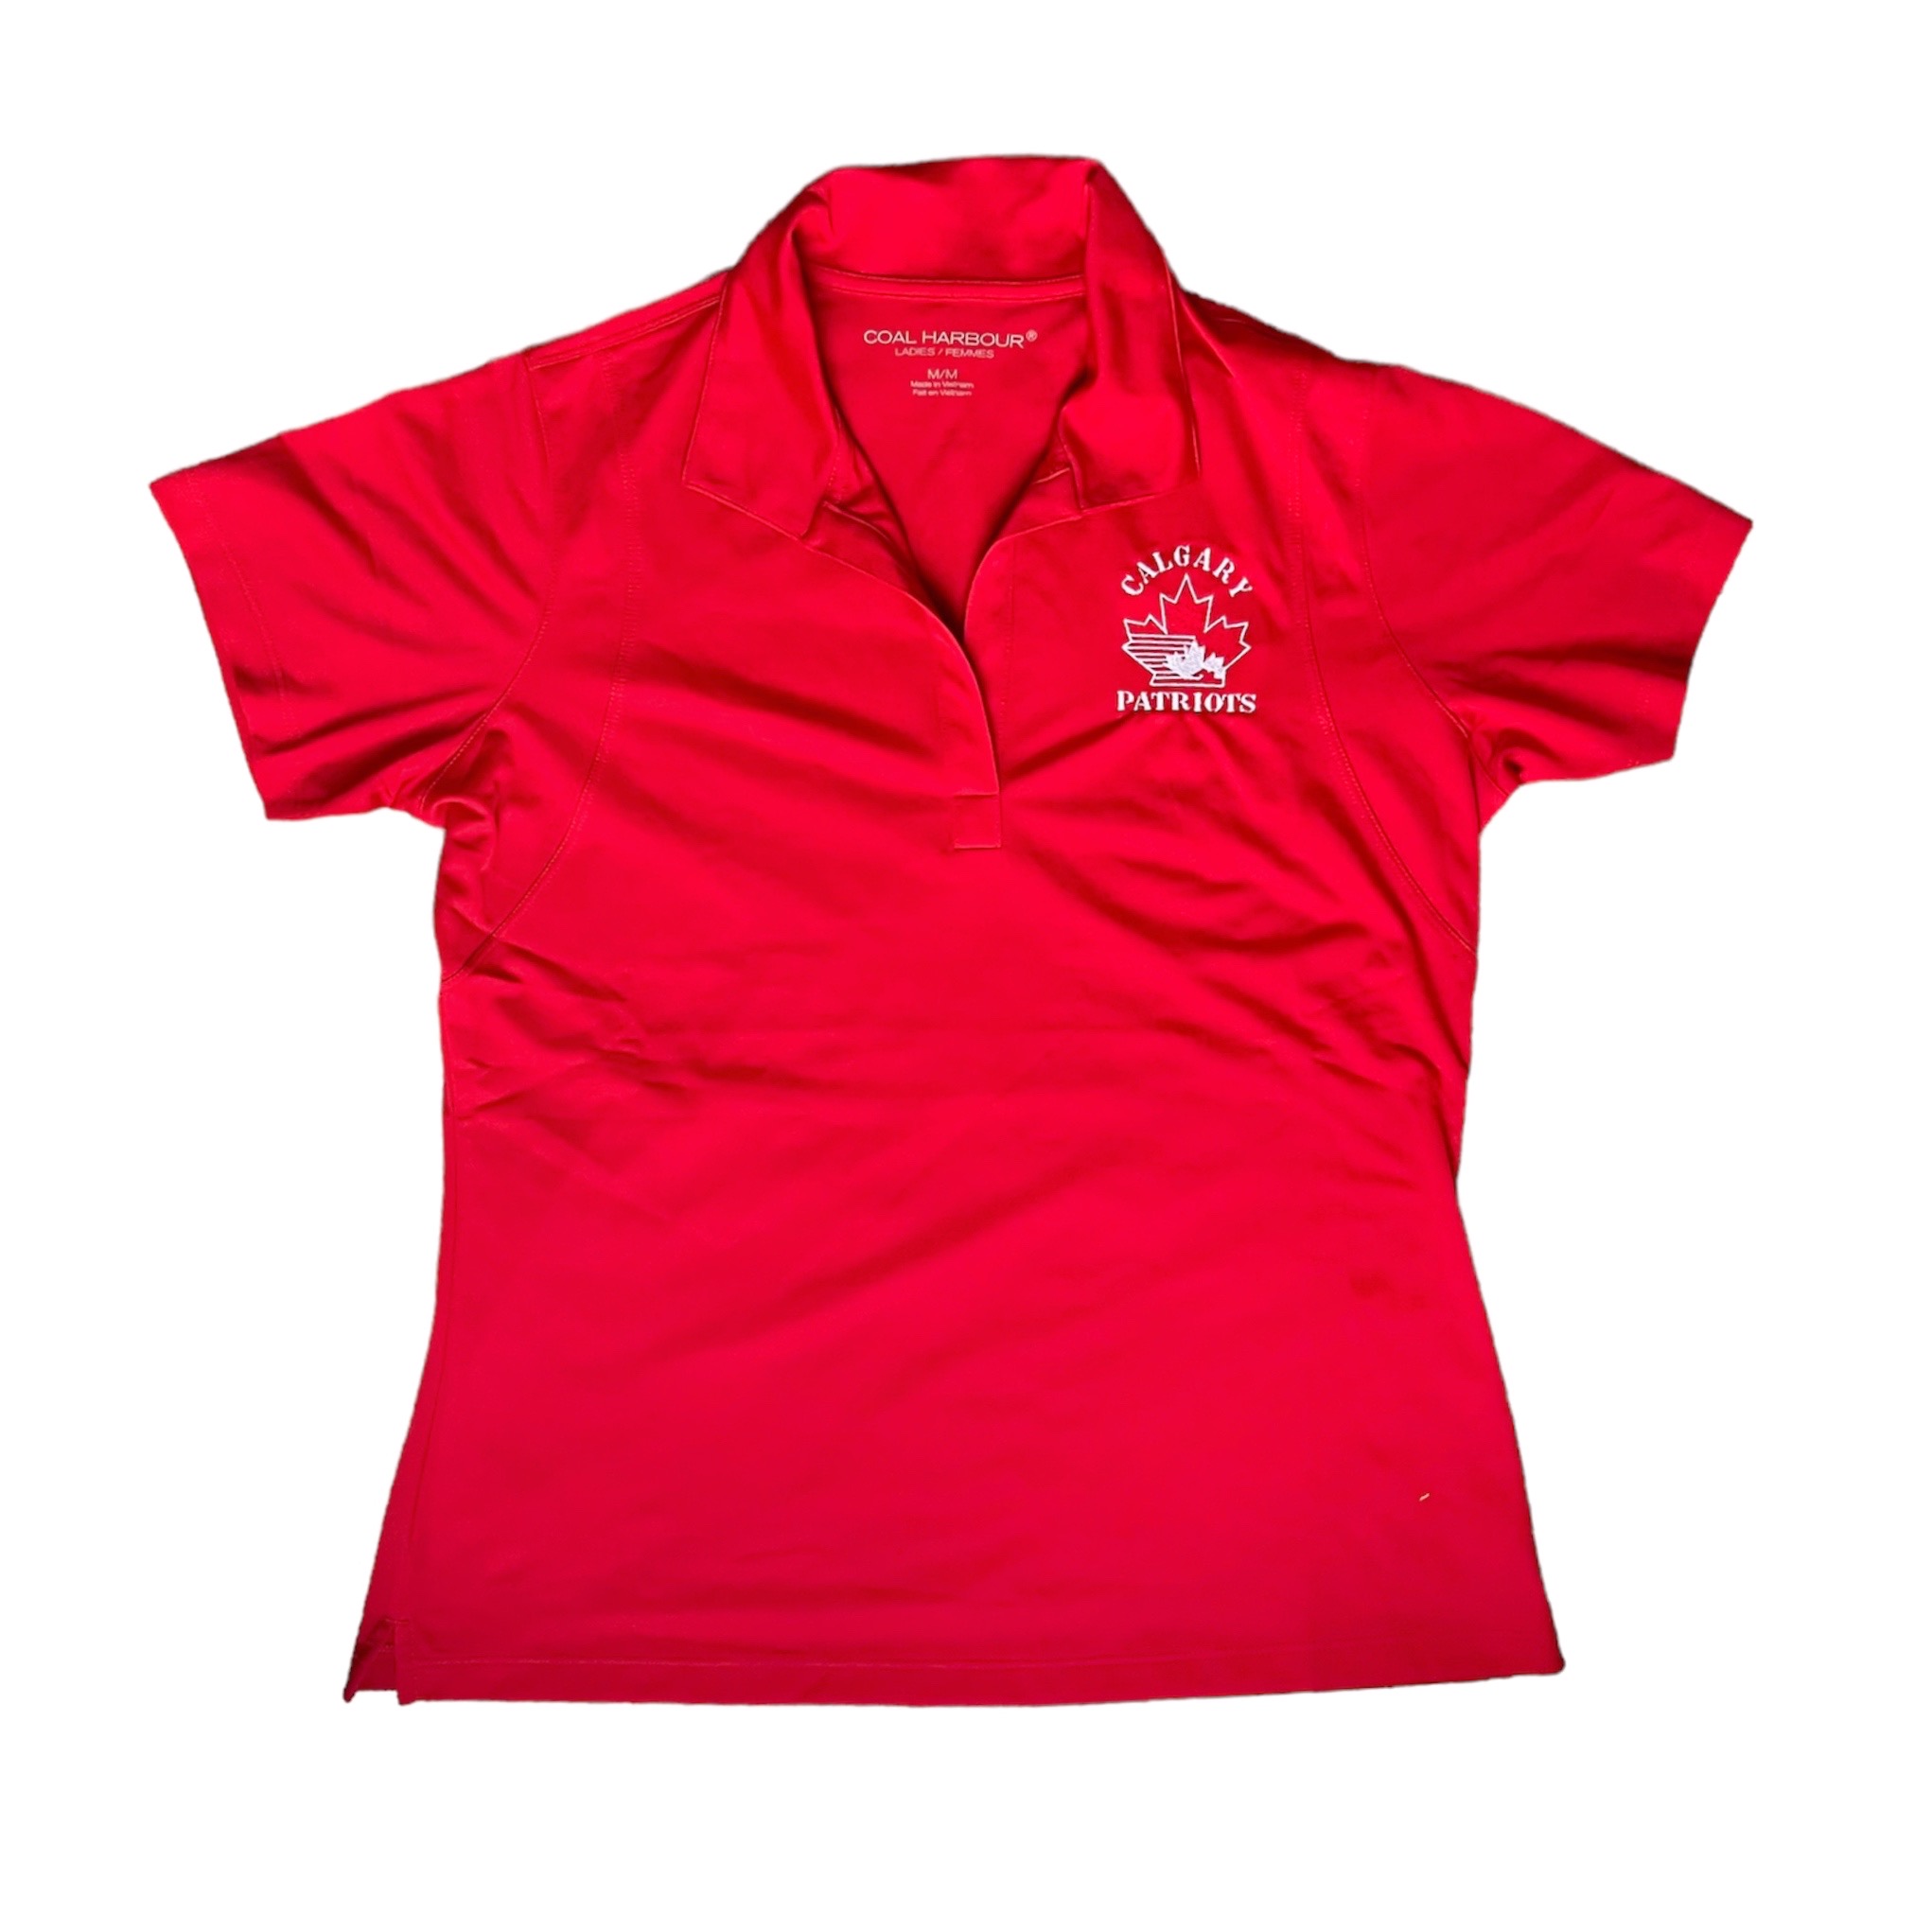 Women's Officials Polo Shirt - Red or White